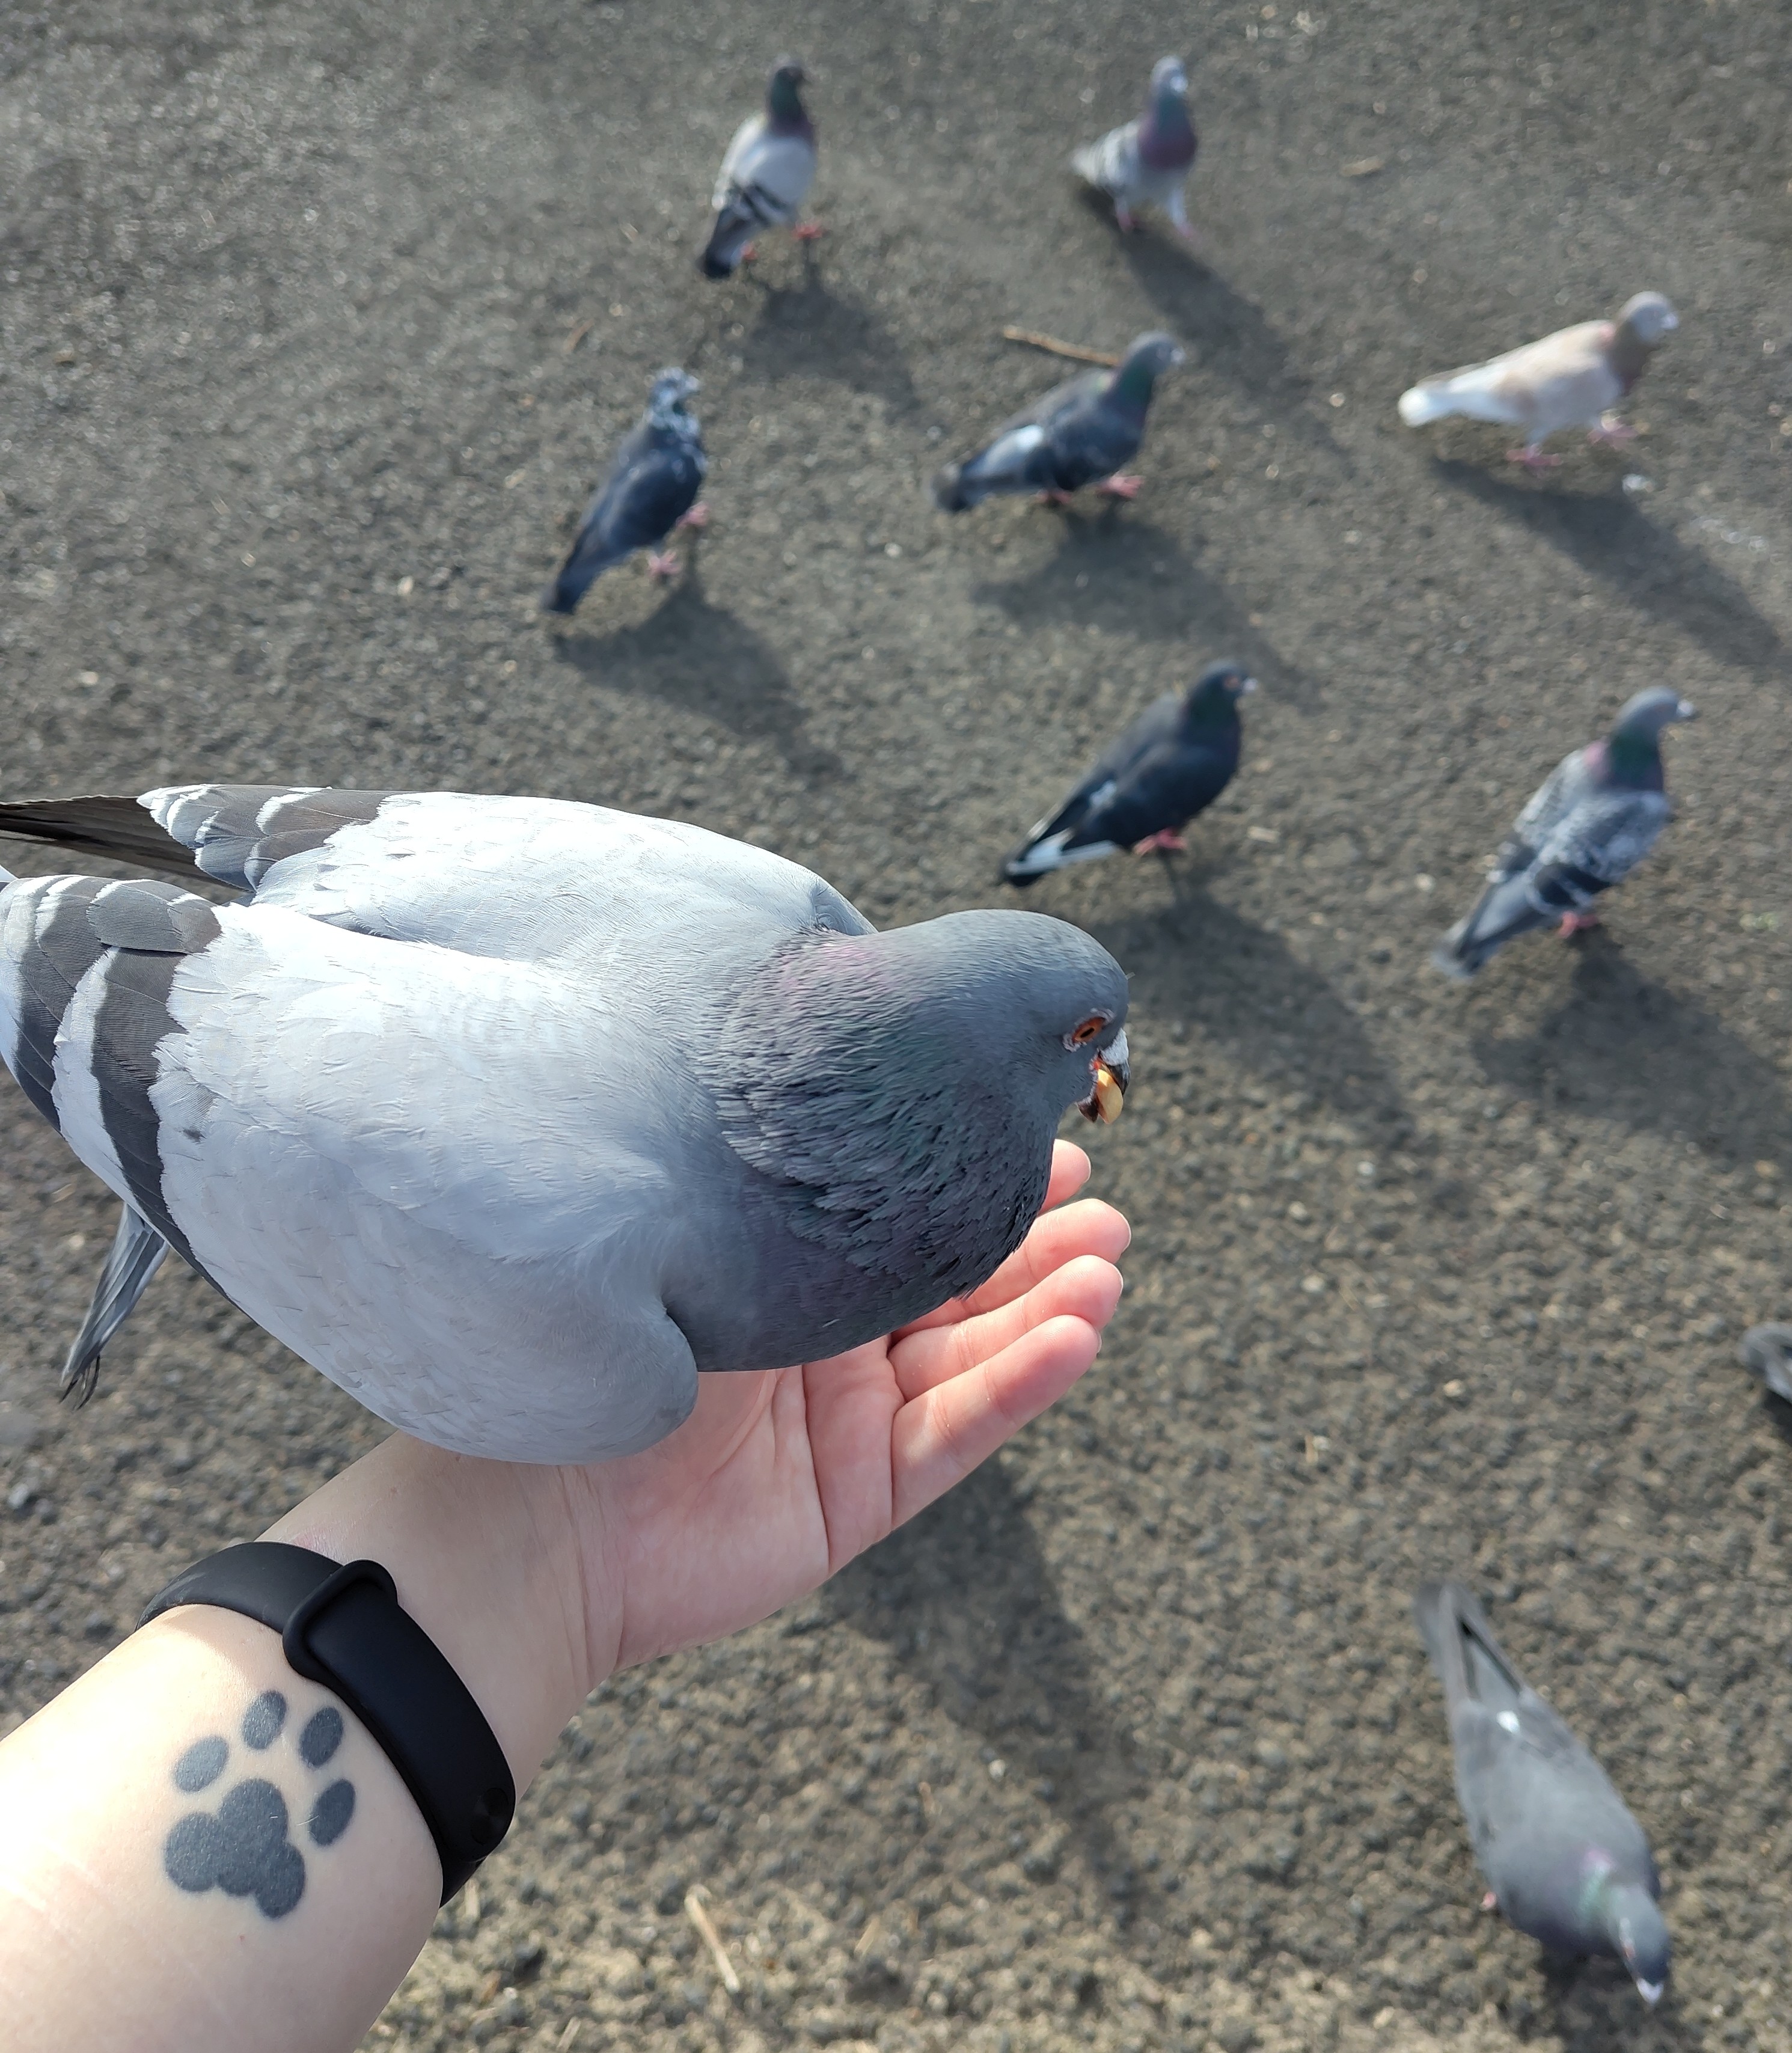 A pigeon sitting on top of my paw, with a peanut in its beak.